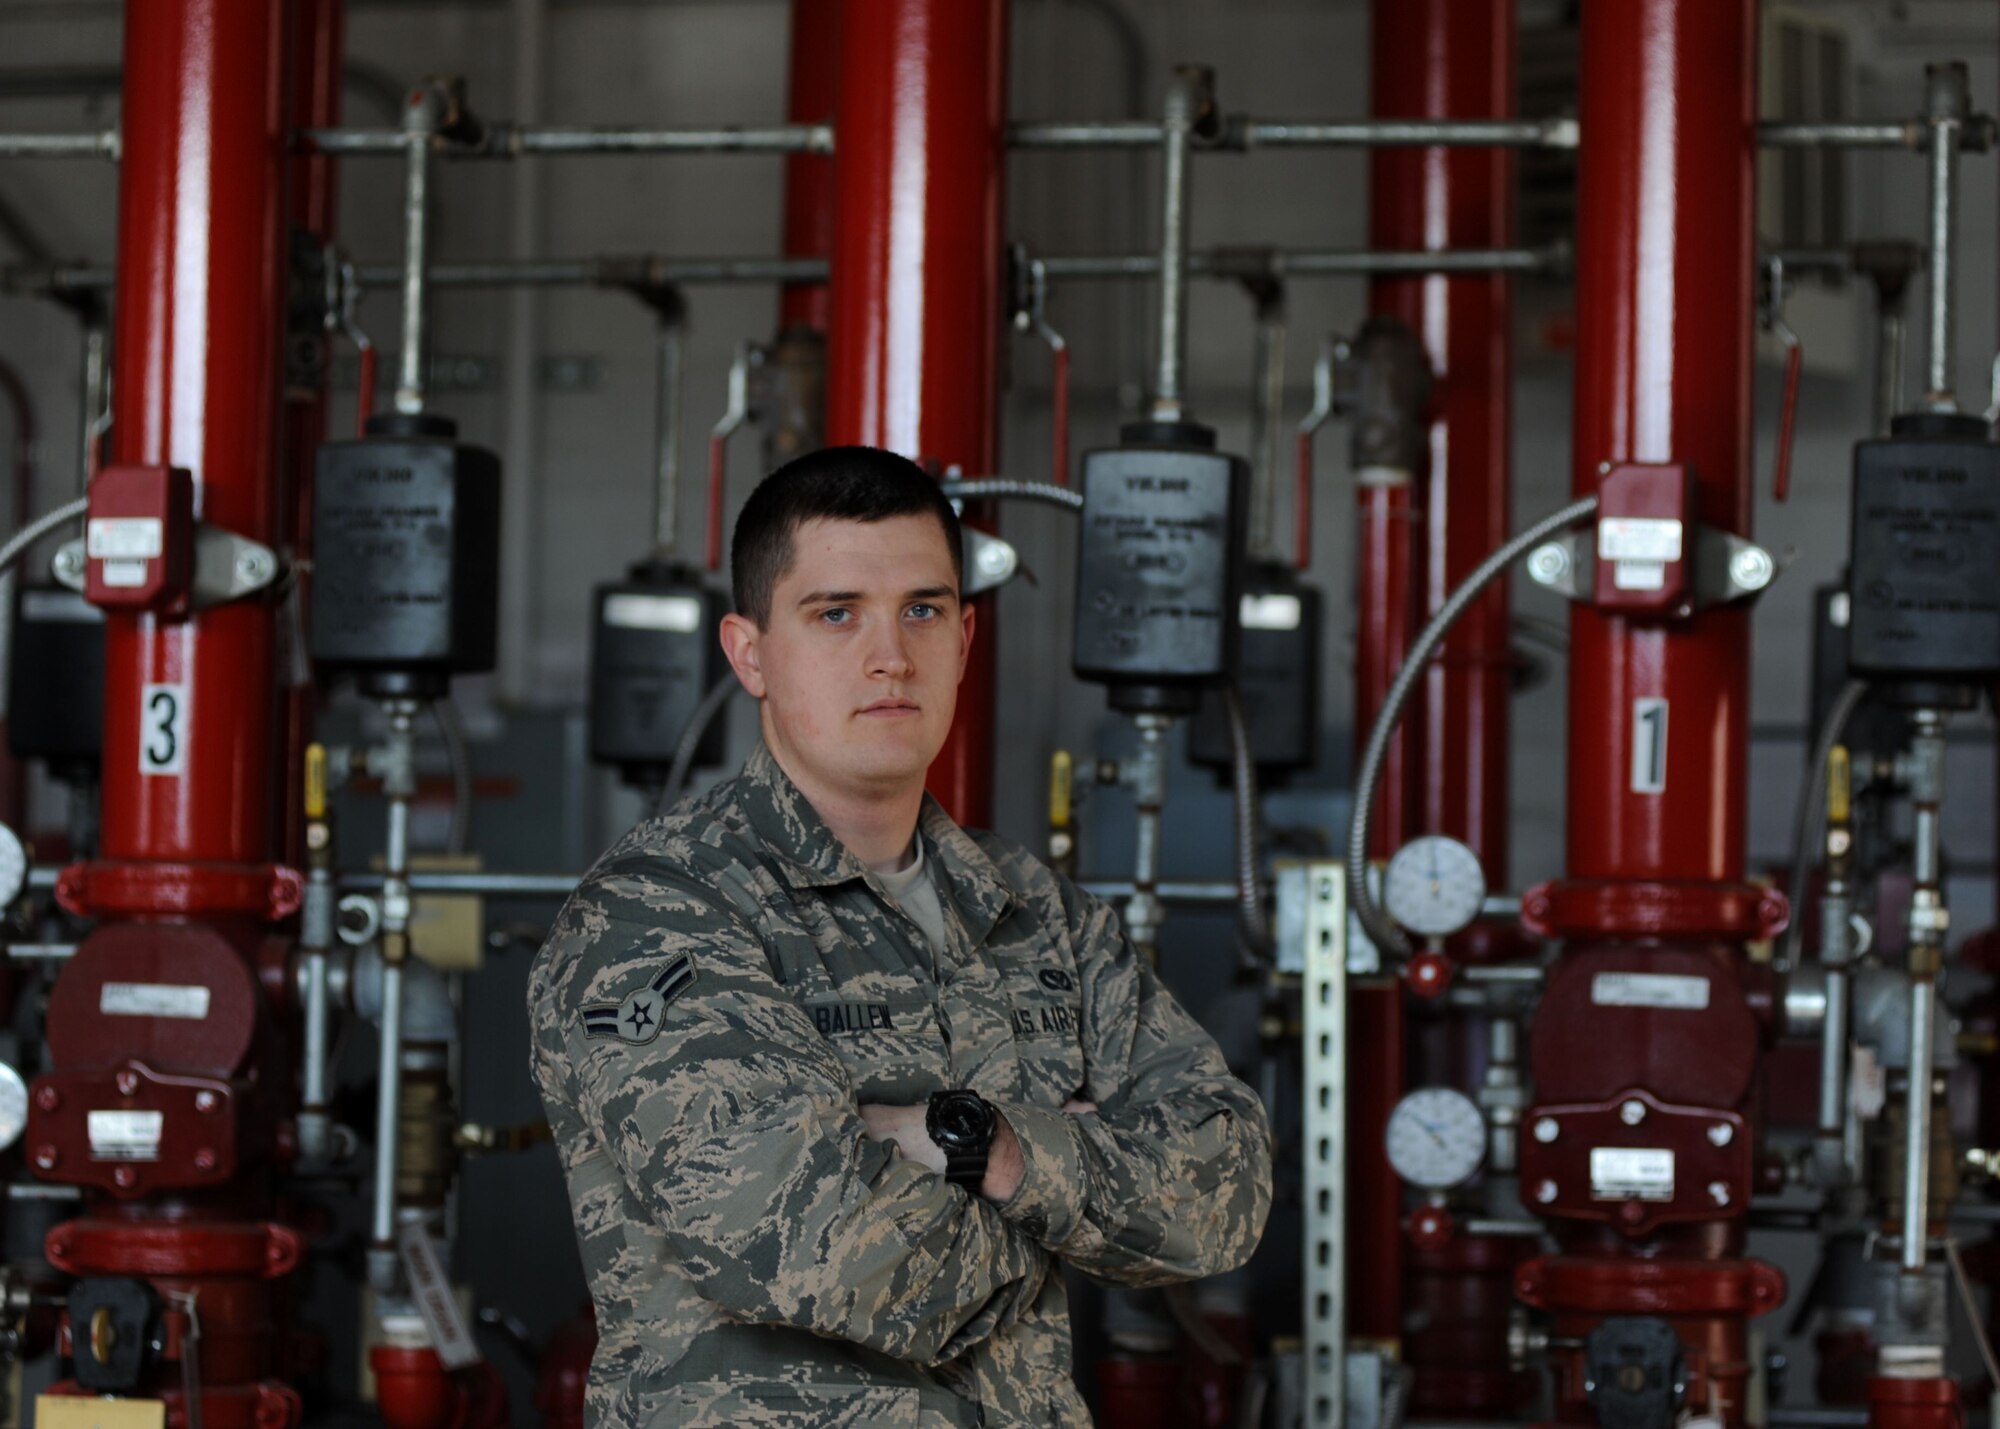 A male is pictured in front of a line of red pipes indoors.